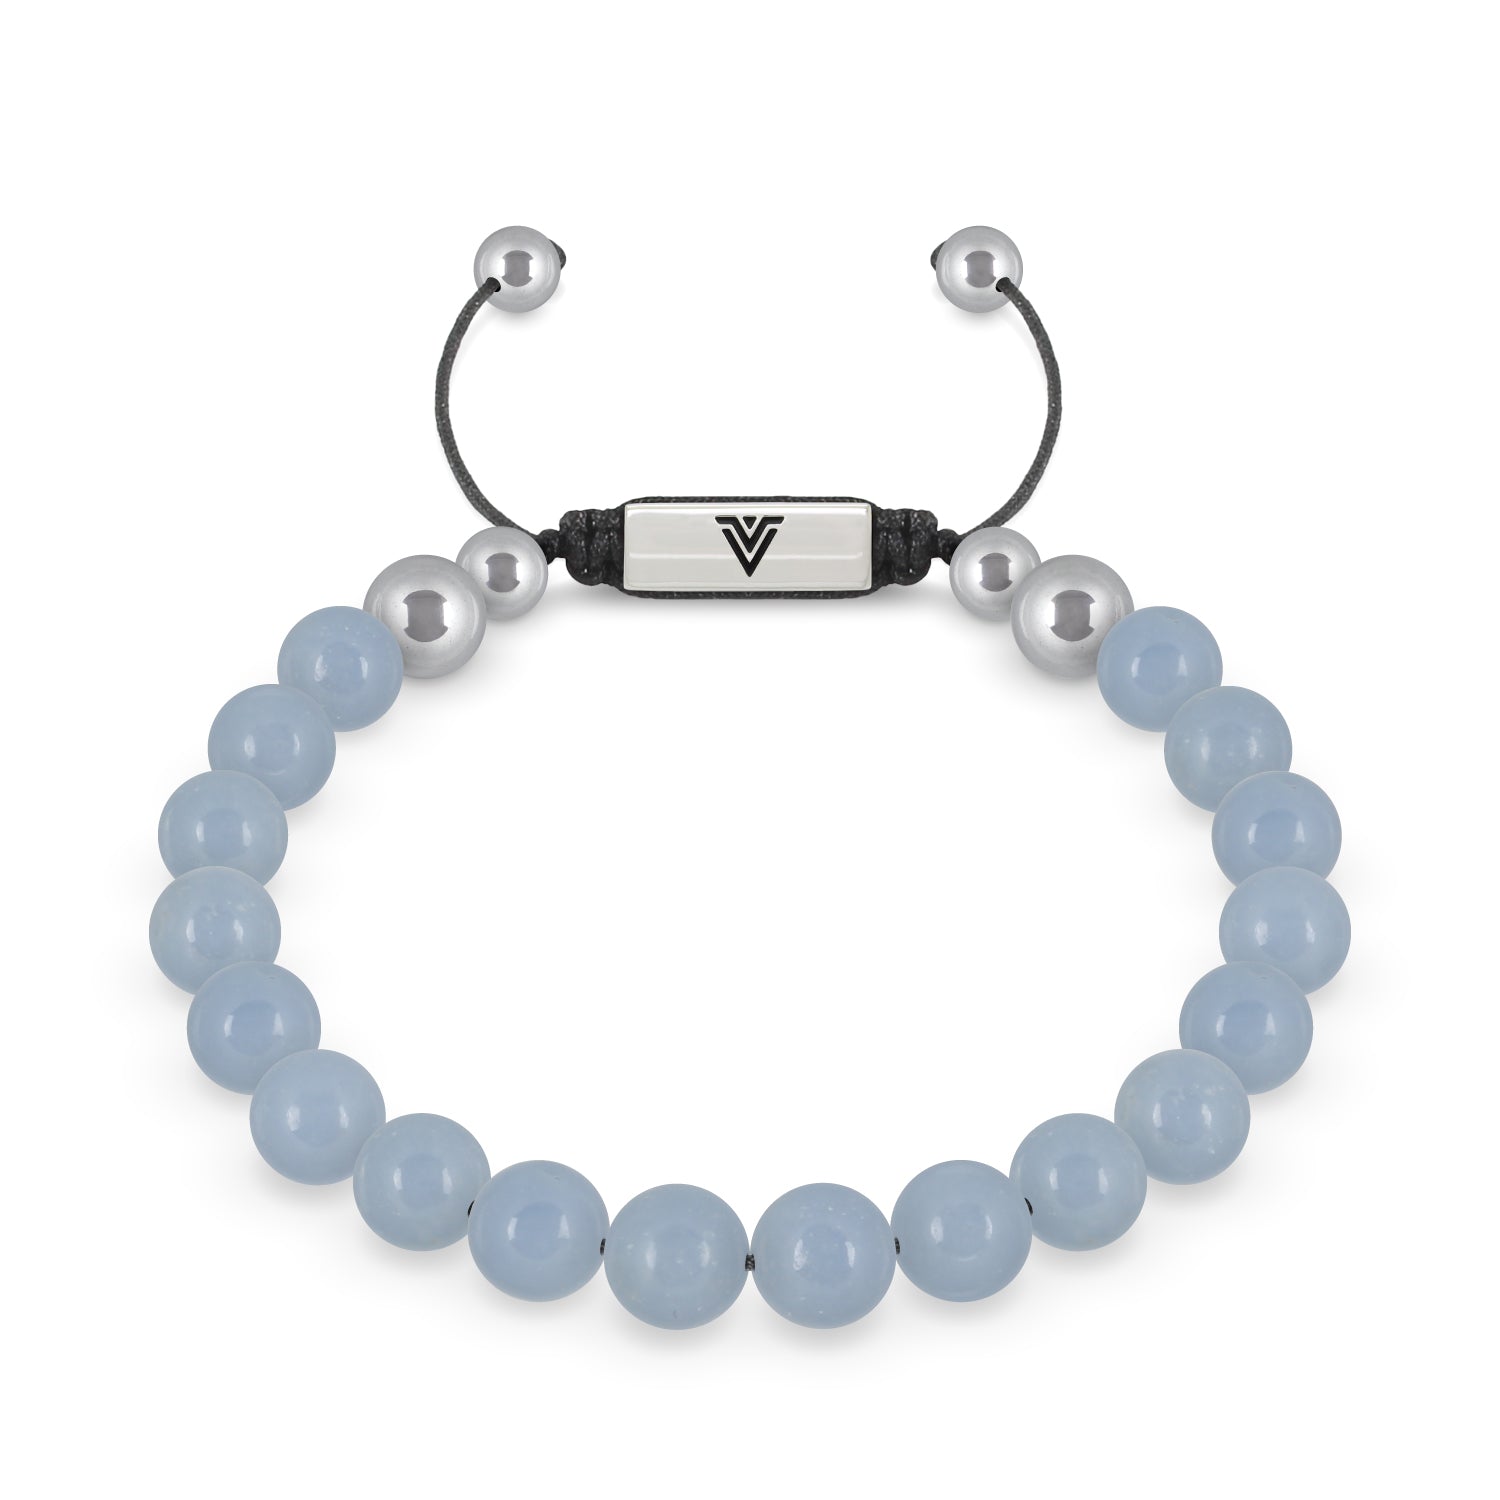 Front view of an 8mm Angelite beaded shamballa bracelet with silver stainless steel logo bead made by Voltlin